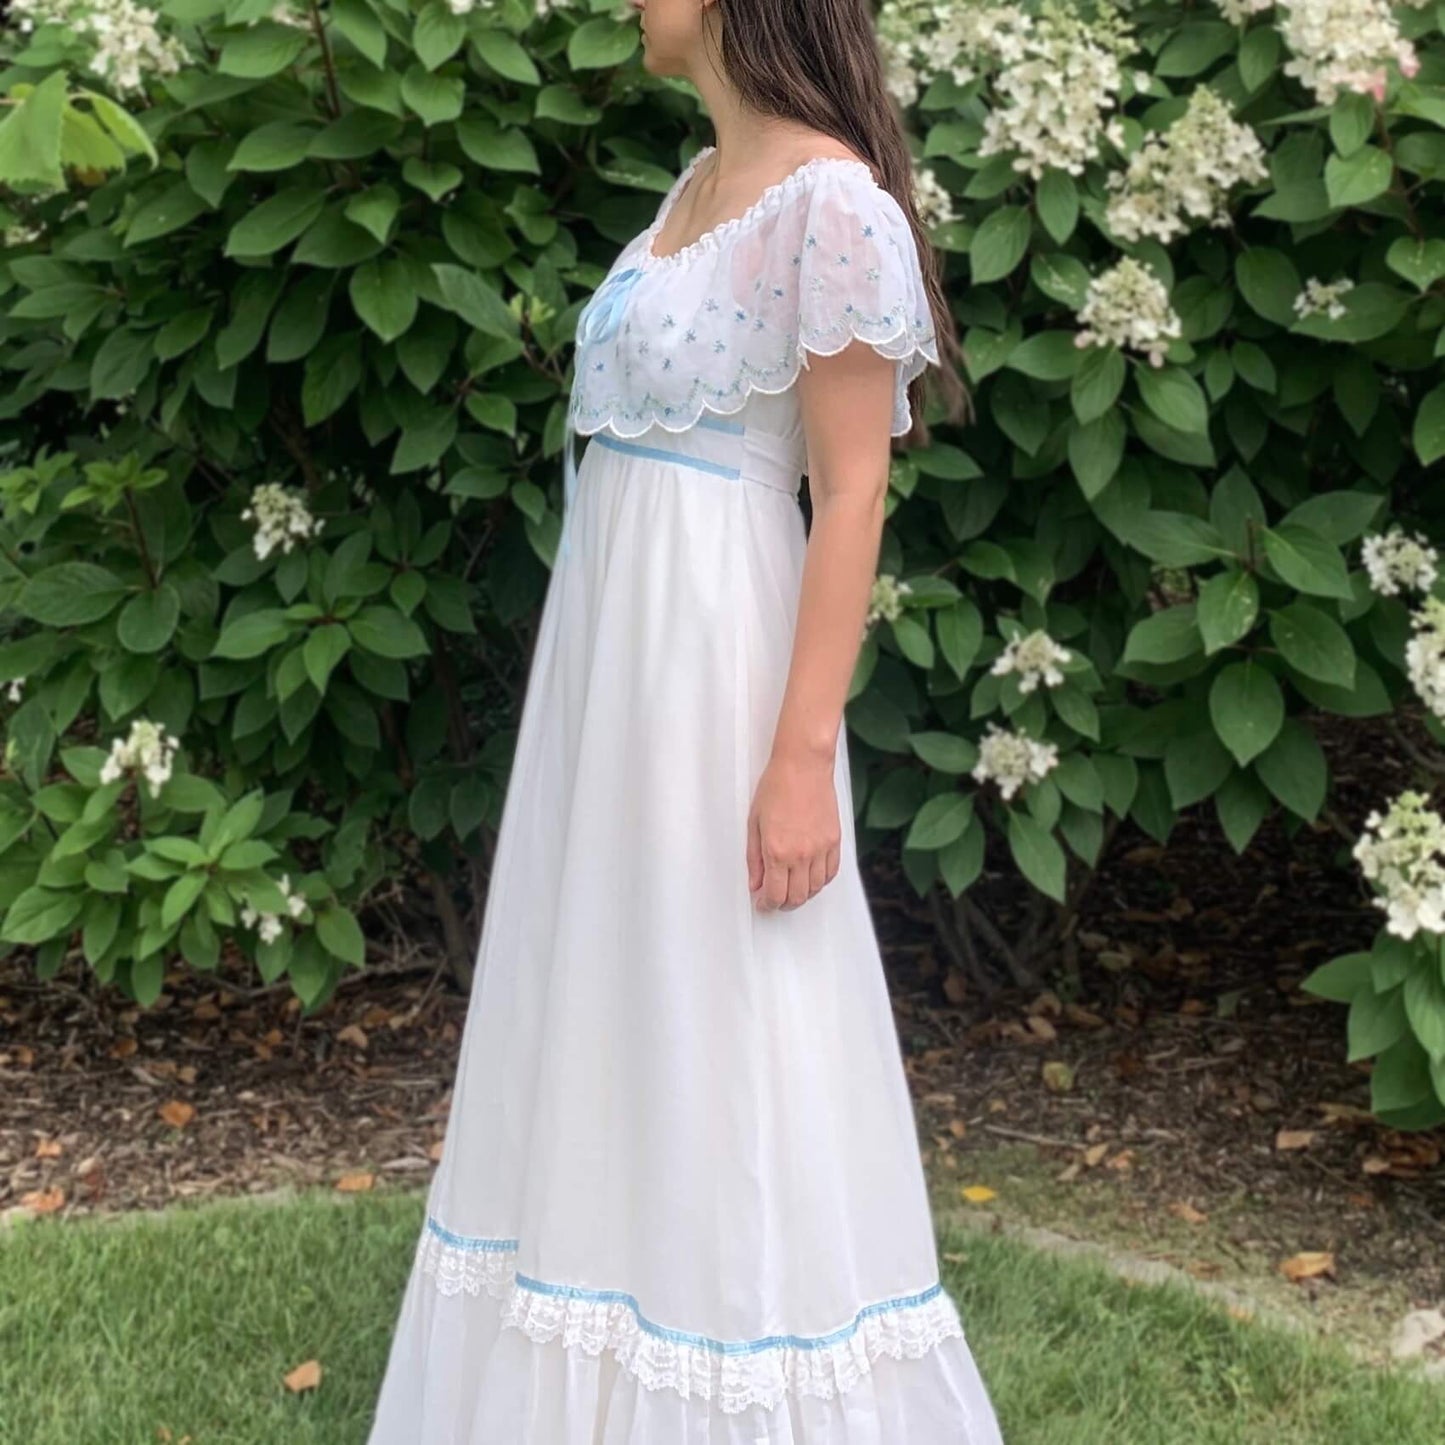 side view of a girl wearing a maxi dress standing on grass in front of a flower bush